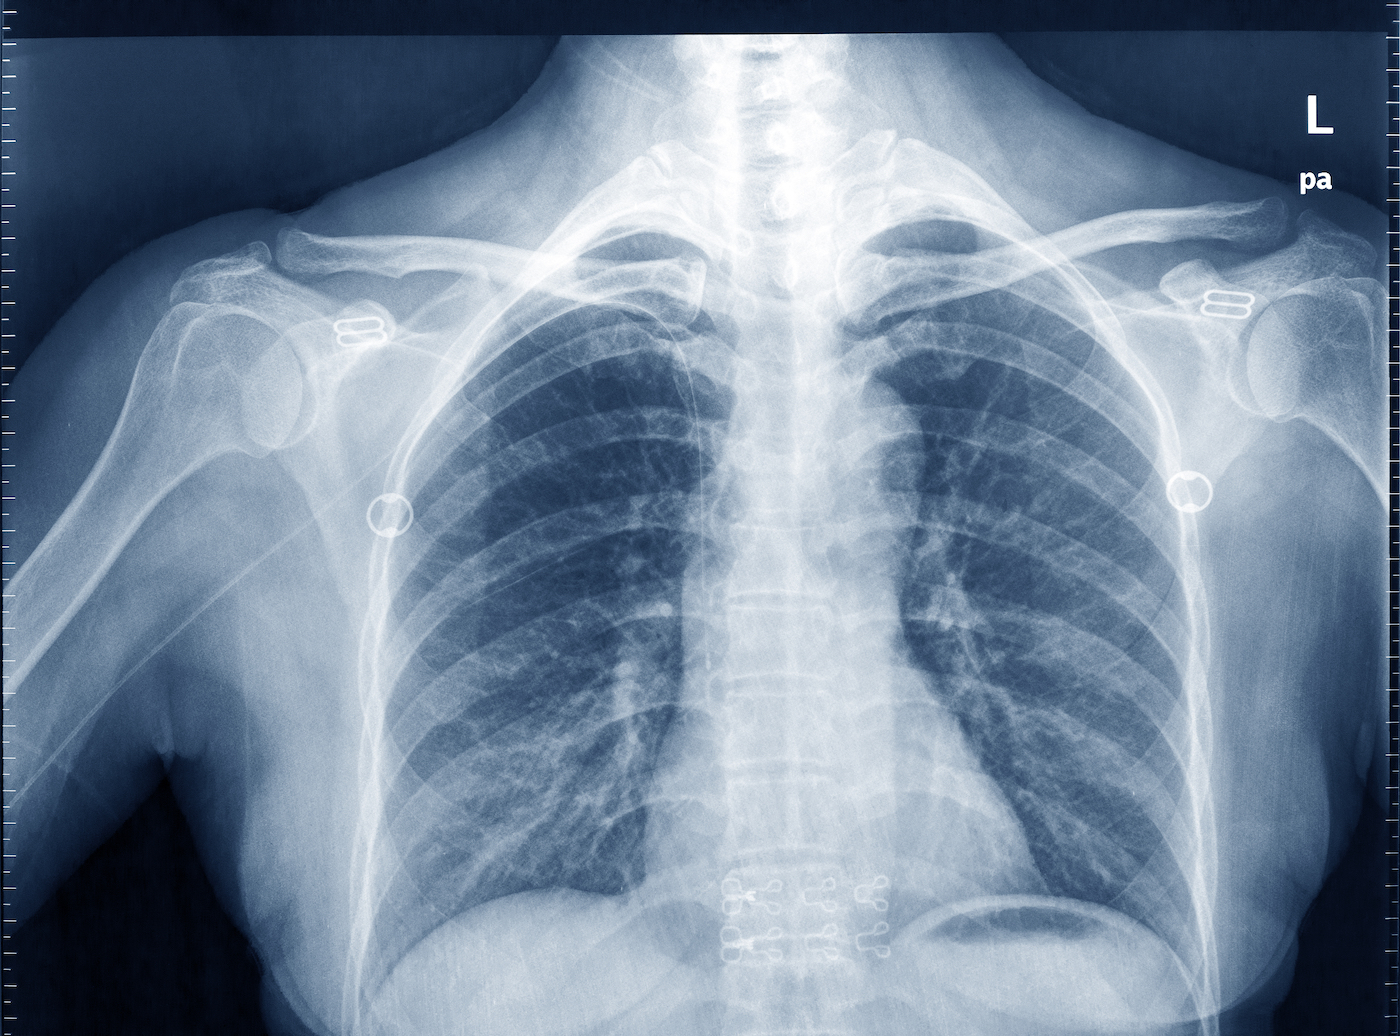 Predicting Heart Disease from Chest X-Rays: The Role of AI